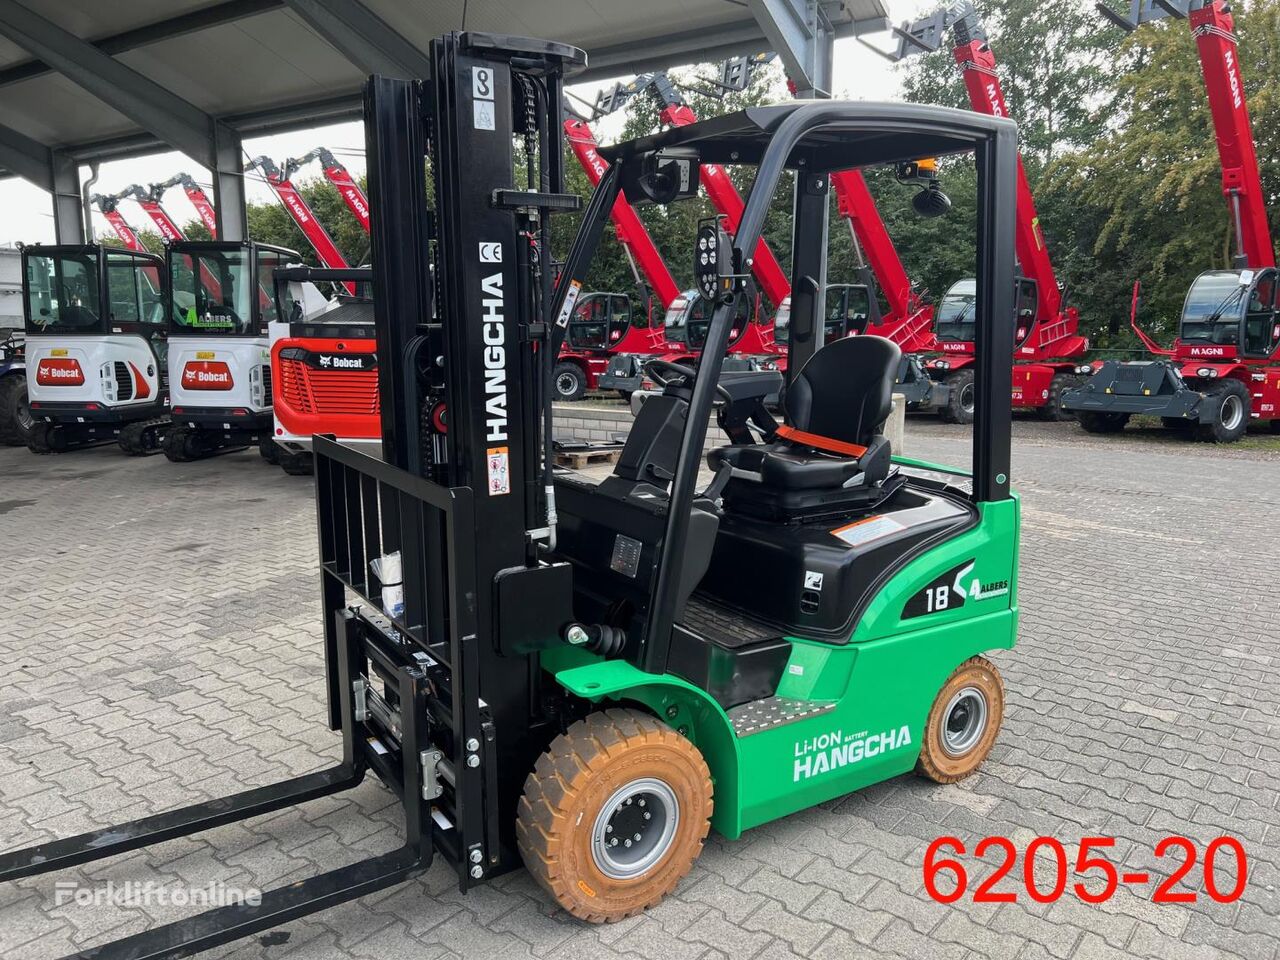 HC CPD 18 XD6-SI16 electric forklift